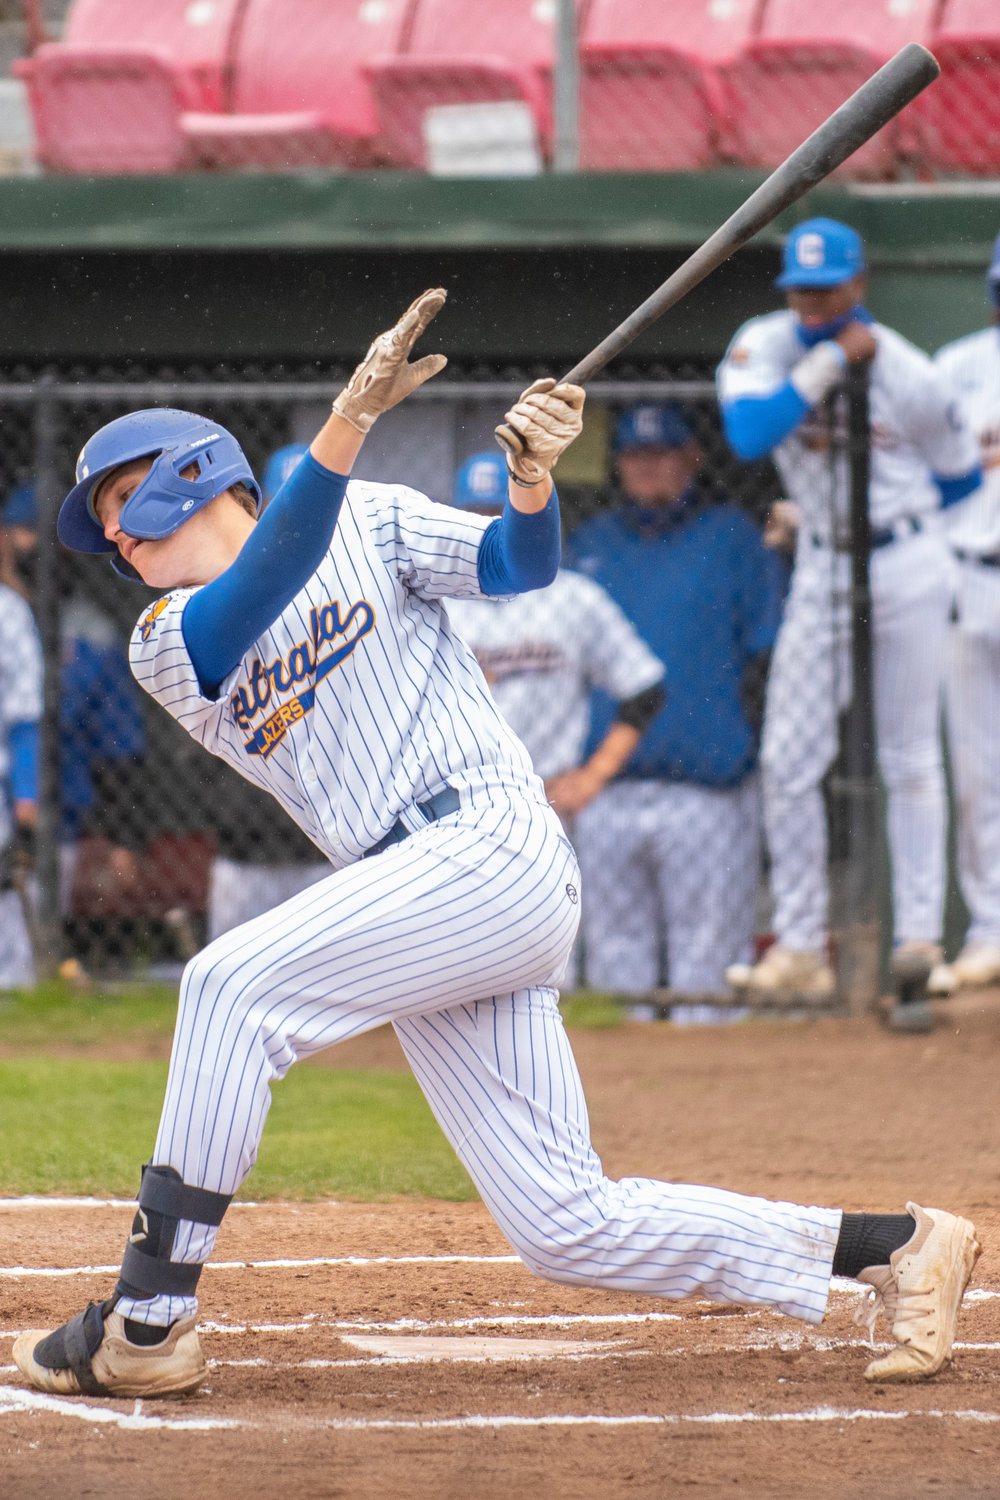 Centralia College freshman first baseman Derek Beairsto takes a cut at a Green River pitch on Saturday.